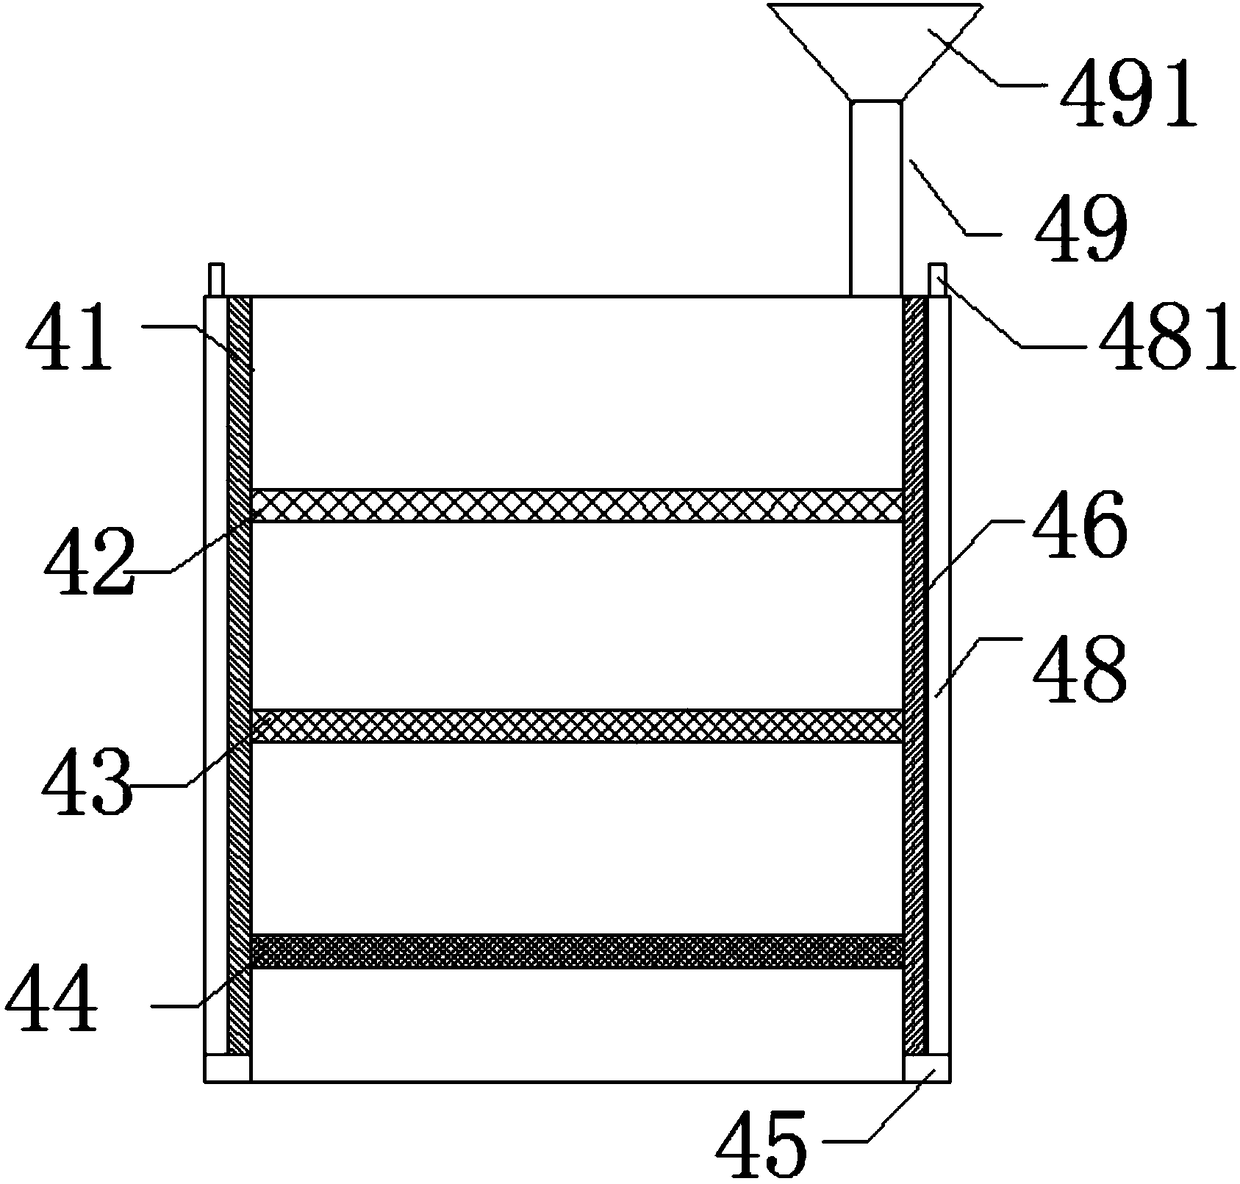 Magnetic substance removing device for silicon carbide powder